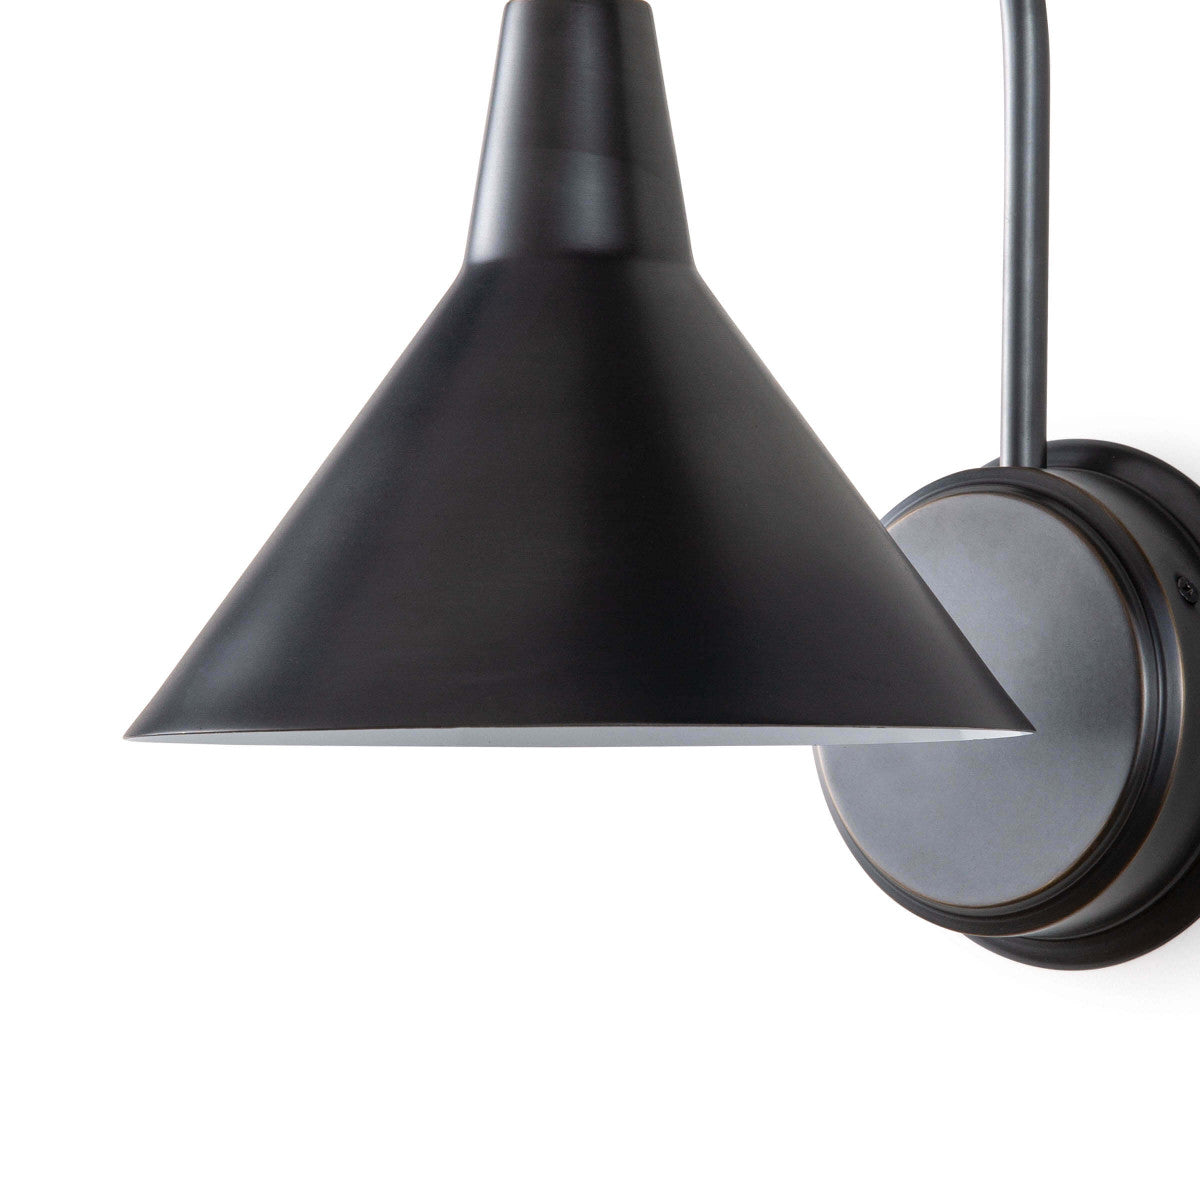 This Dublin Oil Rubbed Bronze Sconce has clean lines, creating a modern industrial look. These are the perfect sophisticated touch for any bedroom, kitchen, or hallway  Size: 7.75"w x 11"d x 13"h Material: Steel